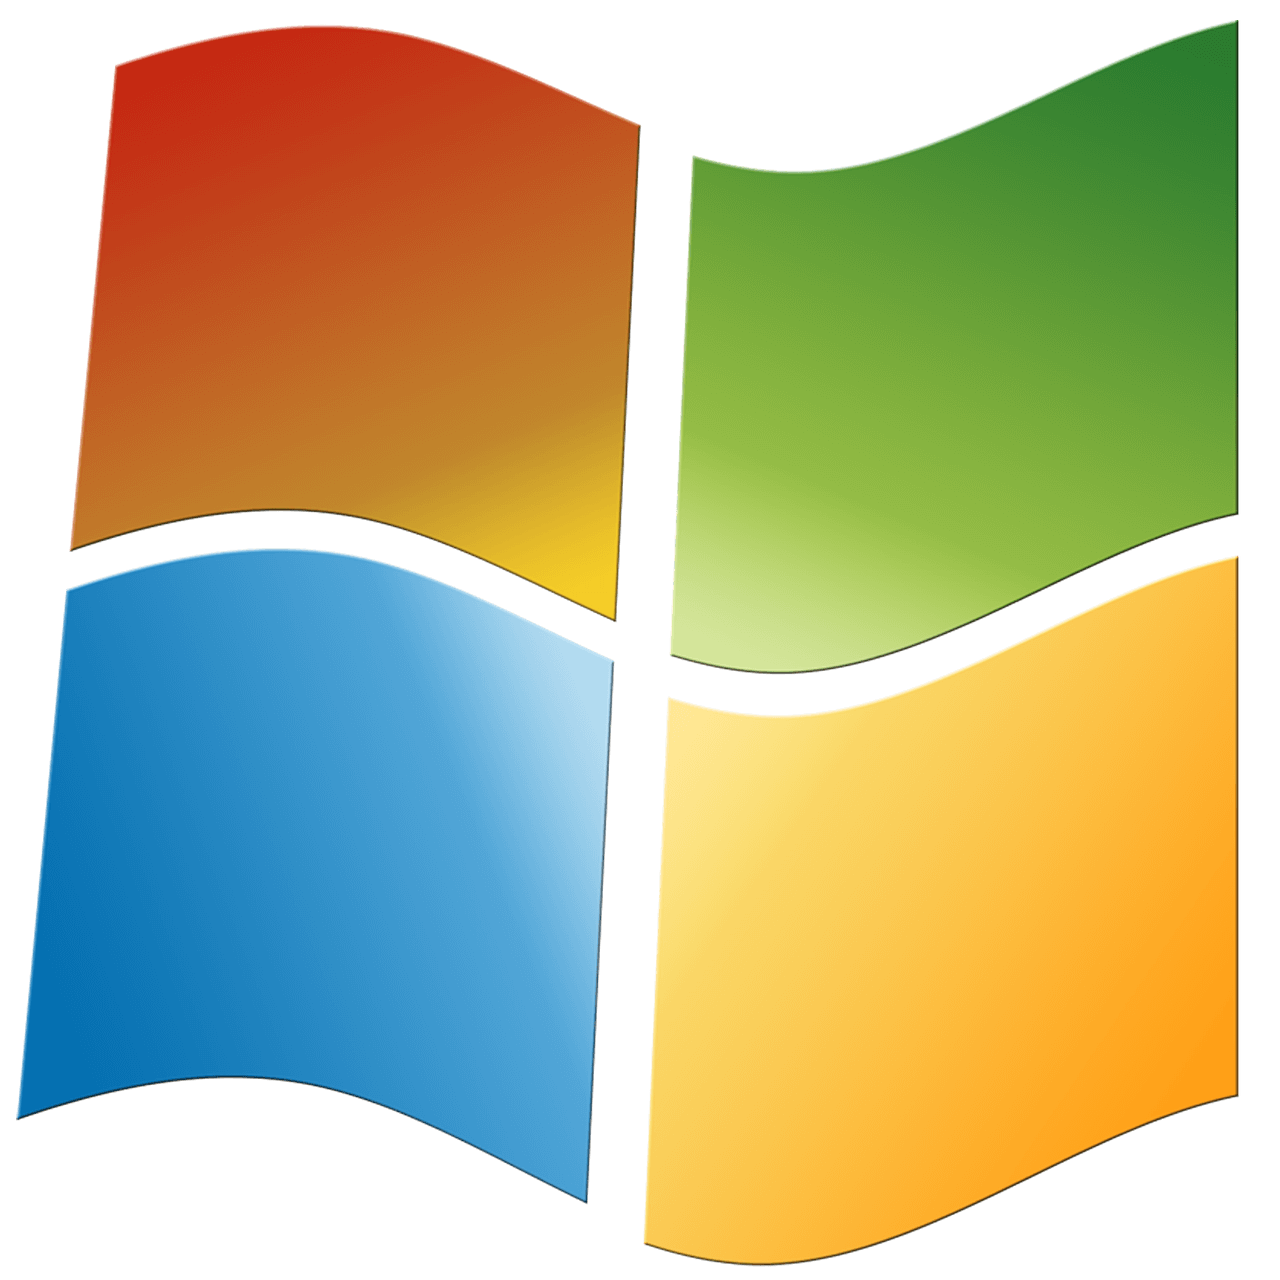 Windows 7 KB4493472 and KB4493446 booting issues